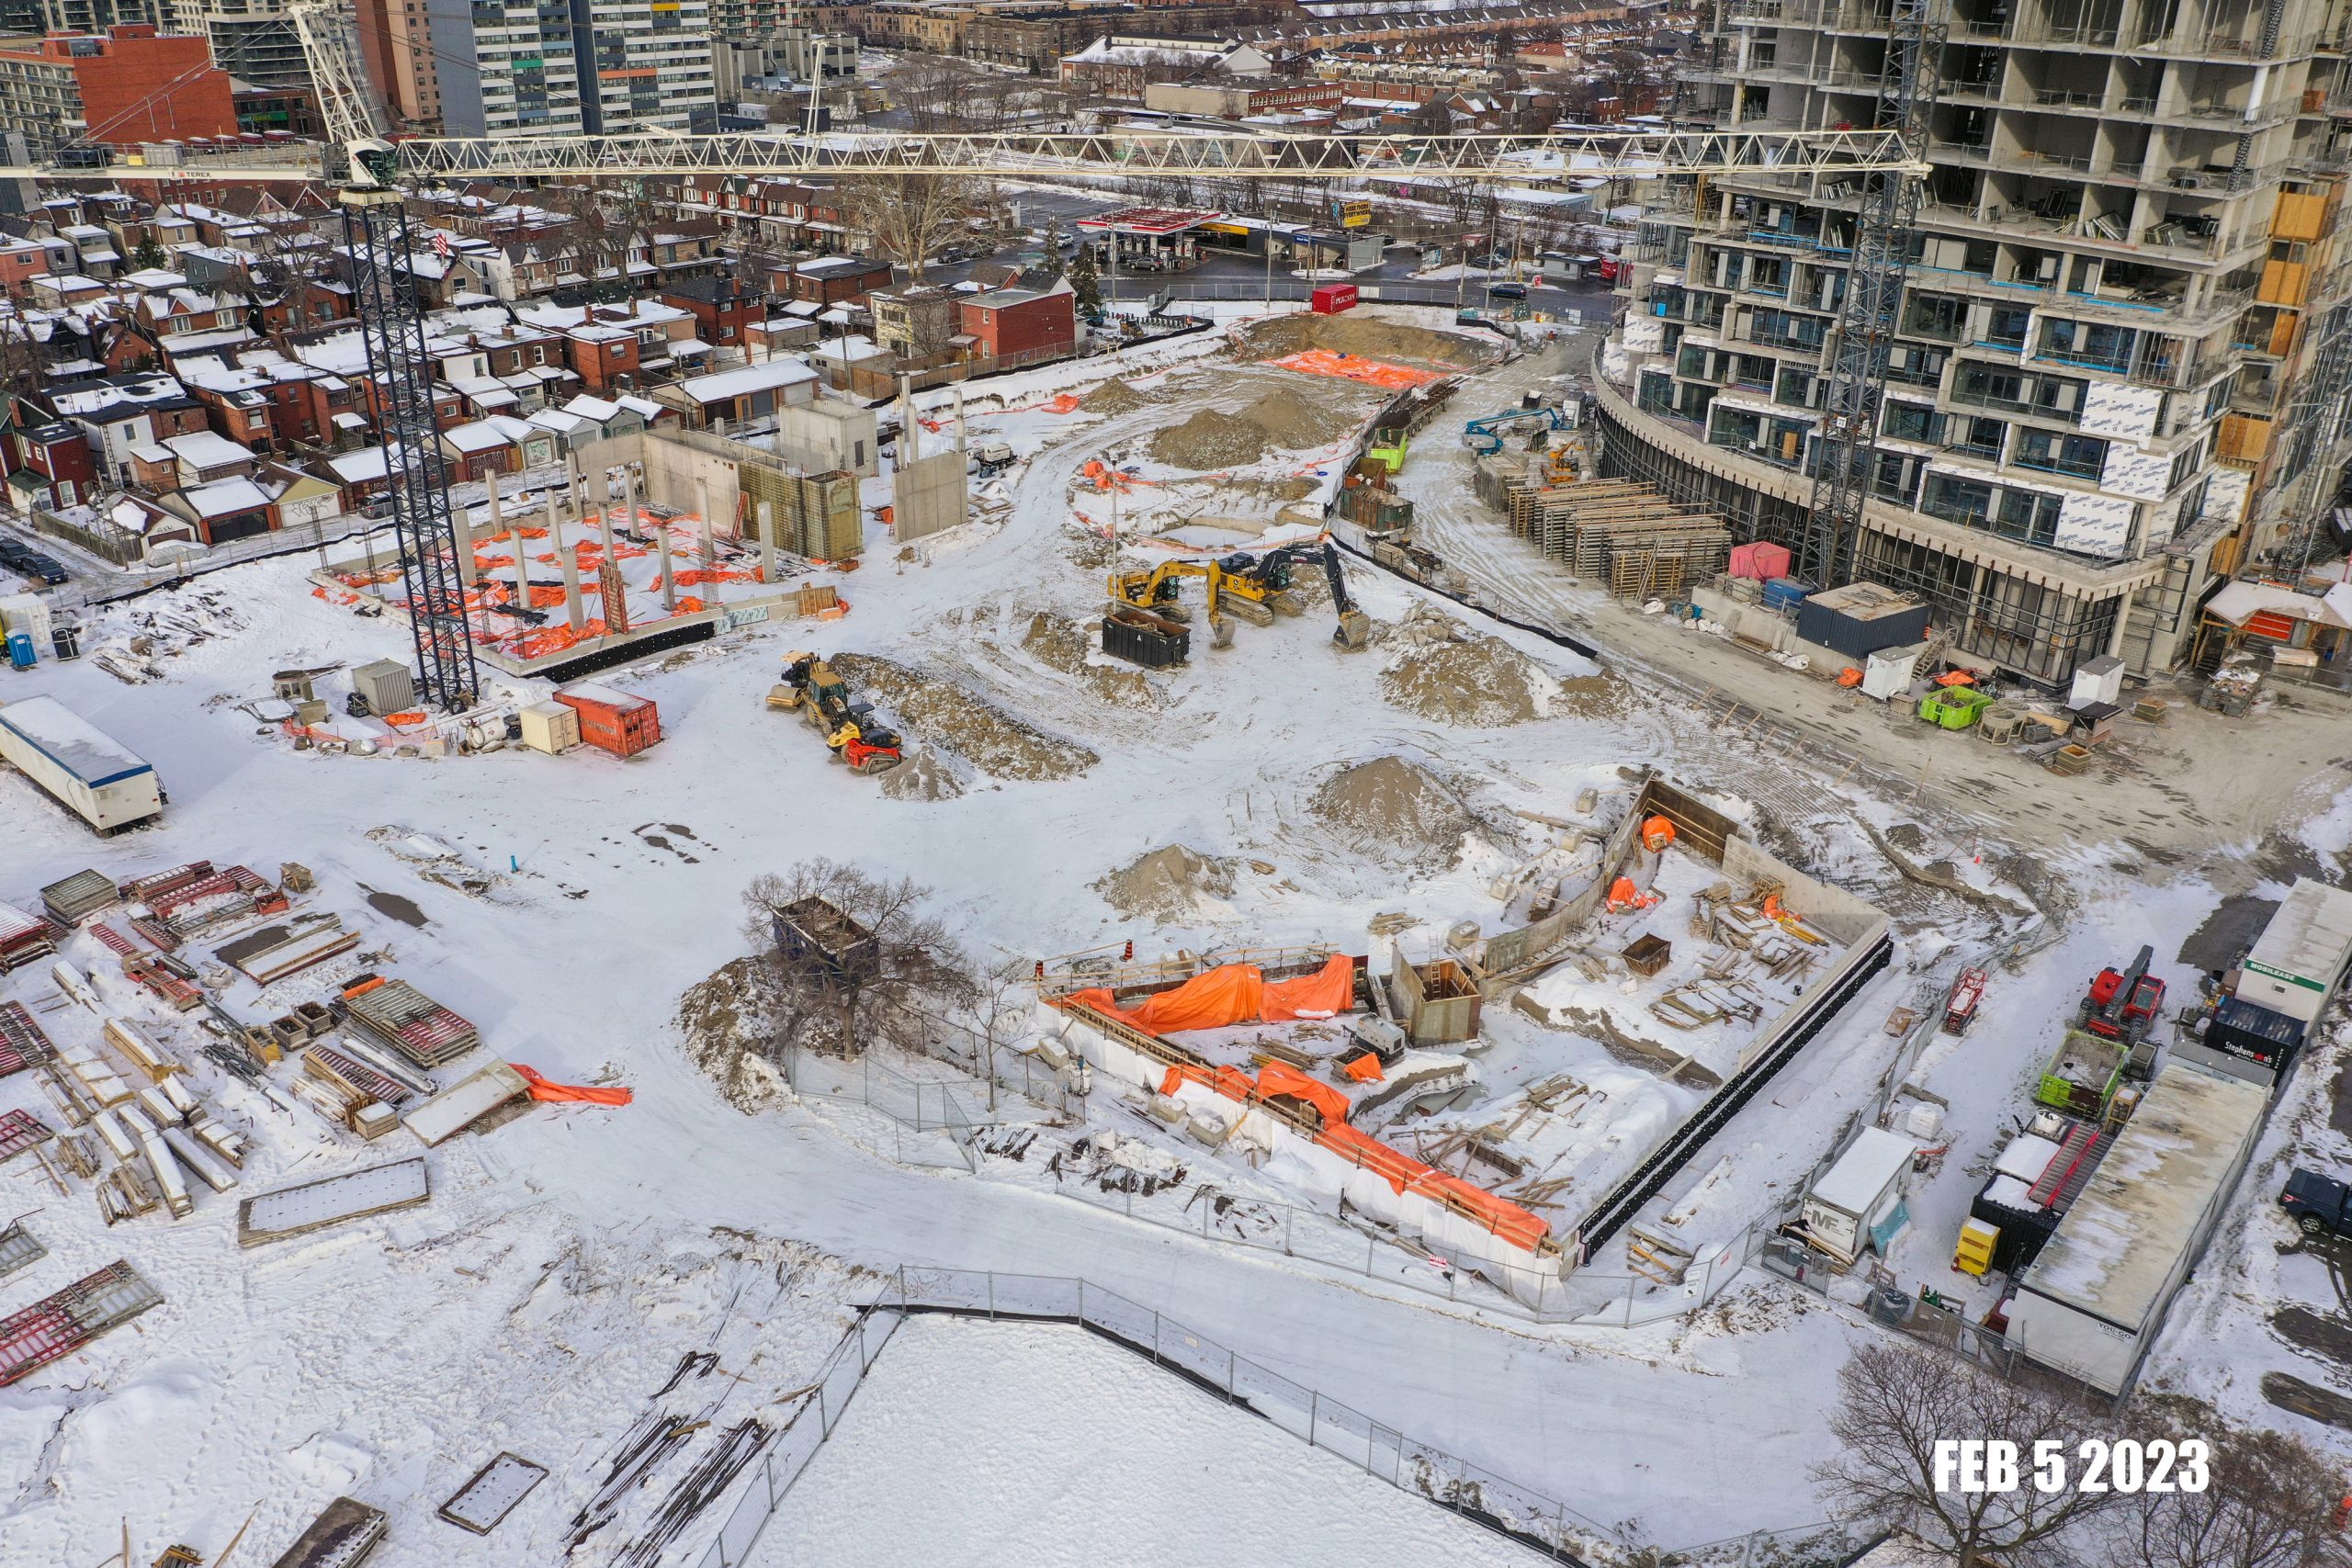 An aerial photograph of the construction site at Wallace Emersion Community Centre on in February 5, 2023, which shows a large crane and multiple excavators and construction equipment. The construction area is predominantly flat, with soil and sand throughout. A thin layer of snow covers the construction area and surrounding residential homes. 